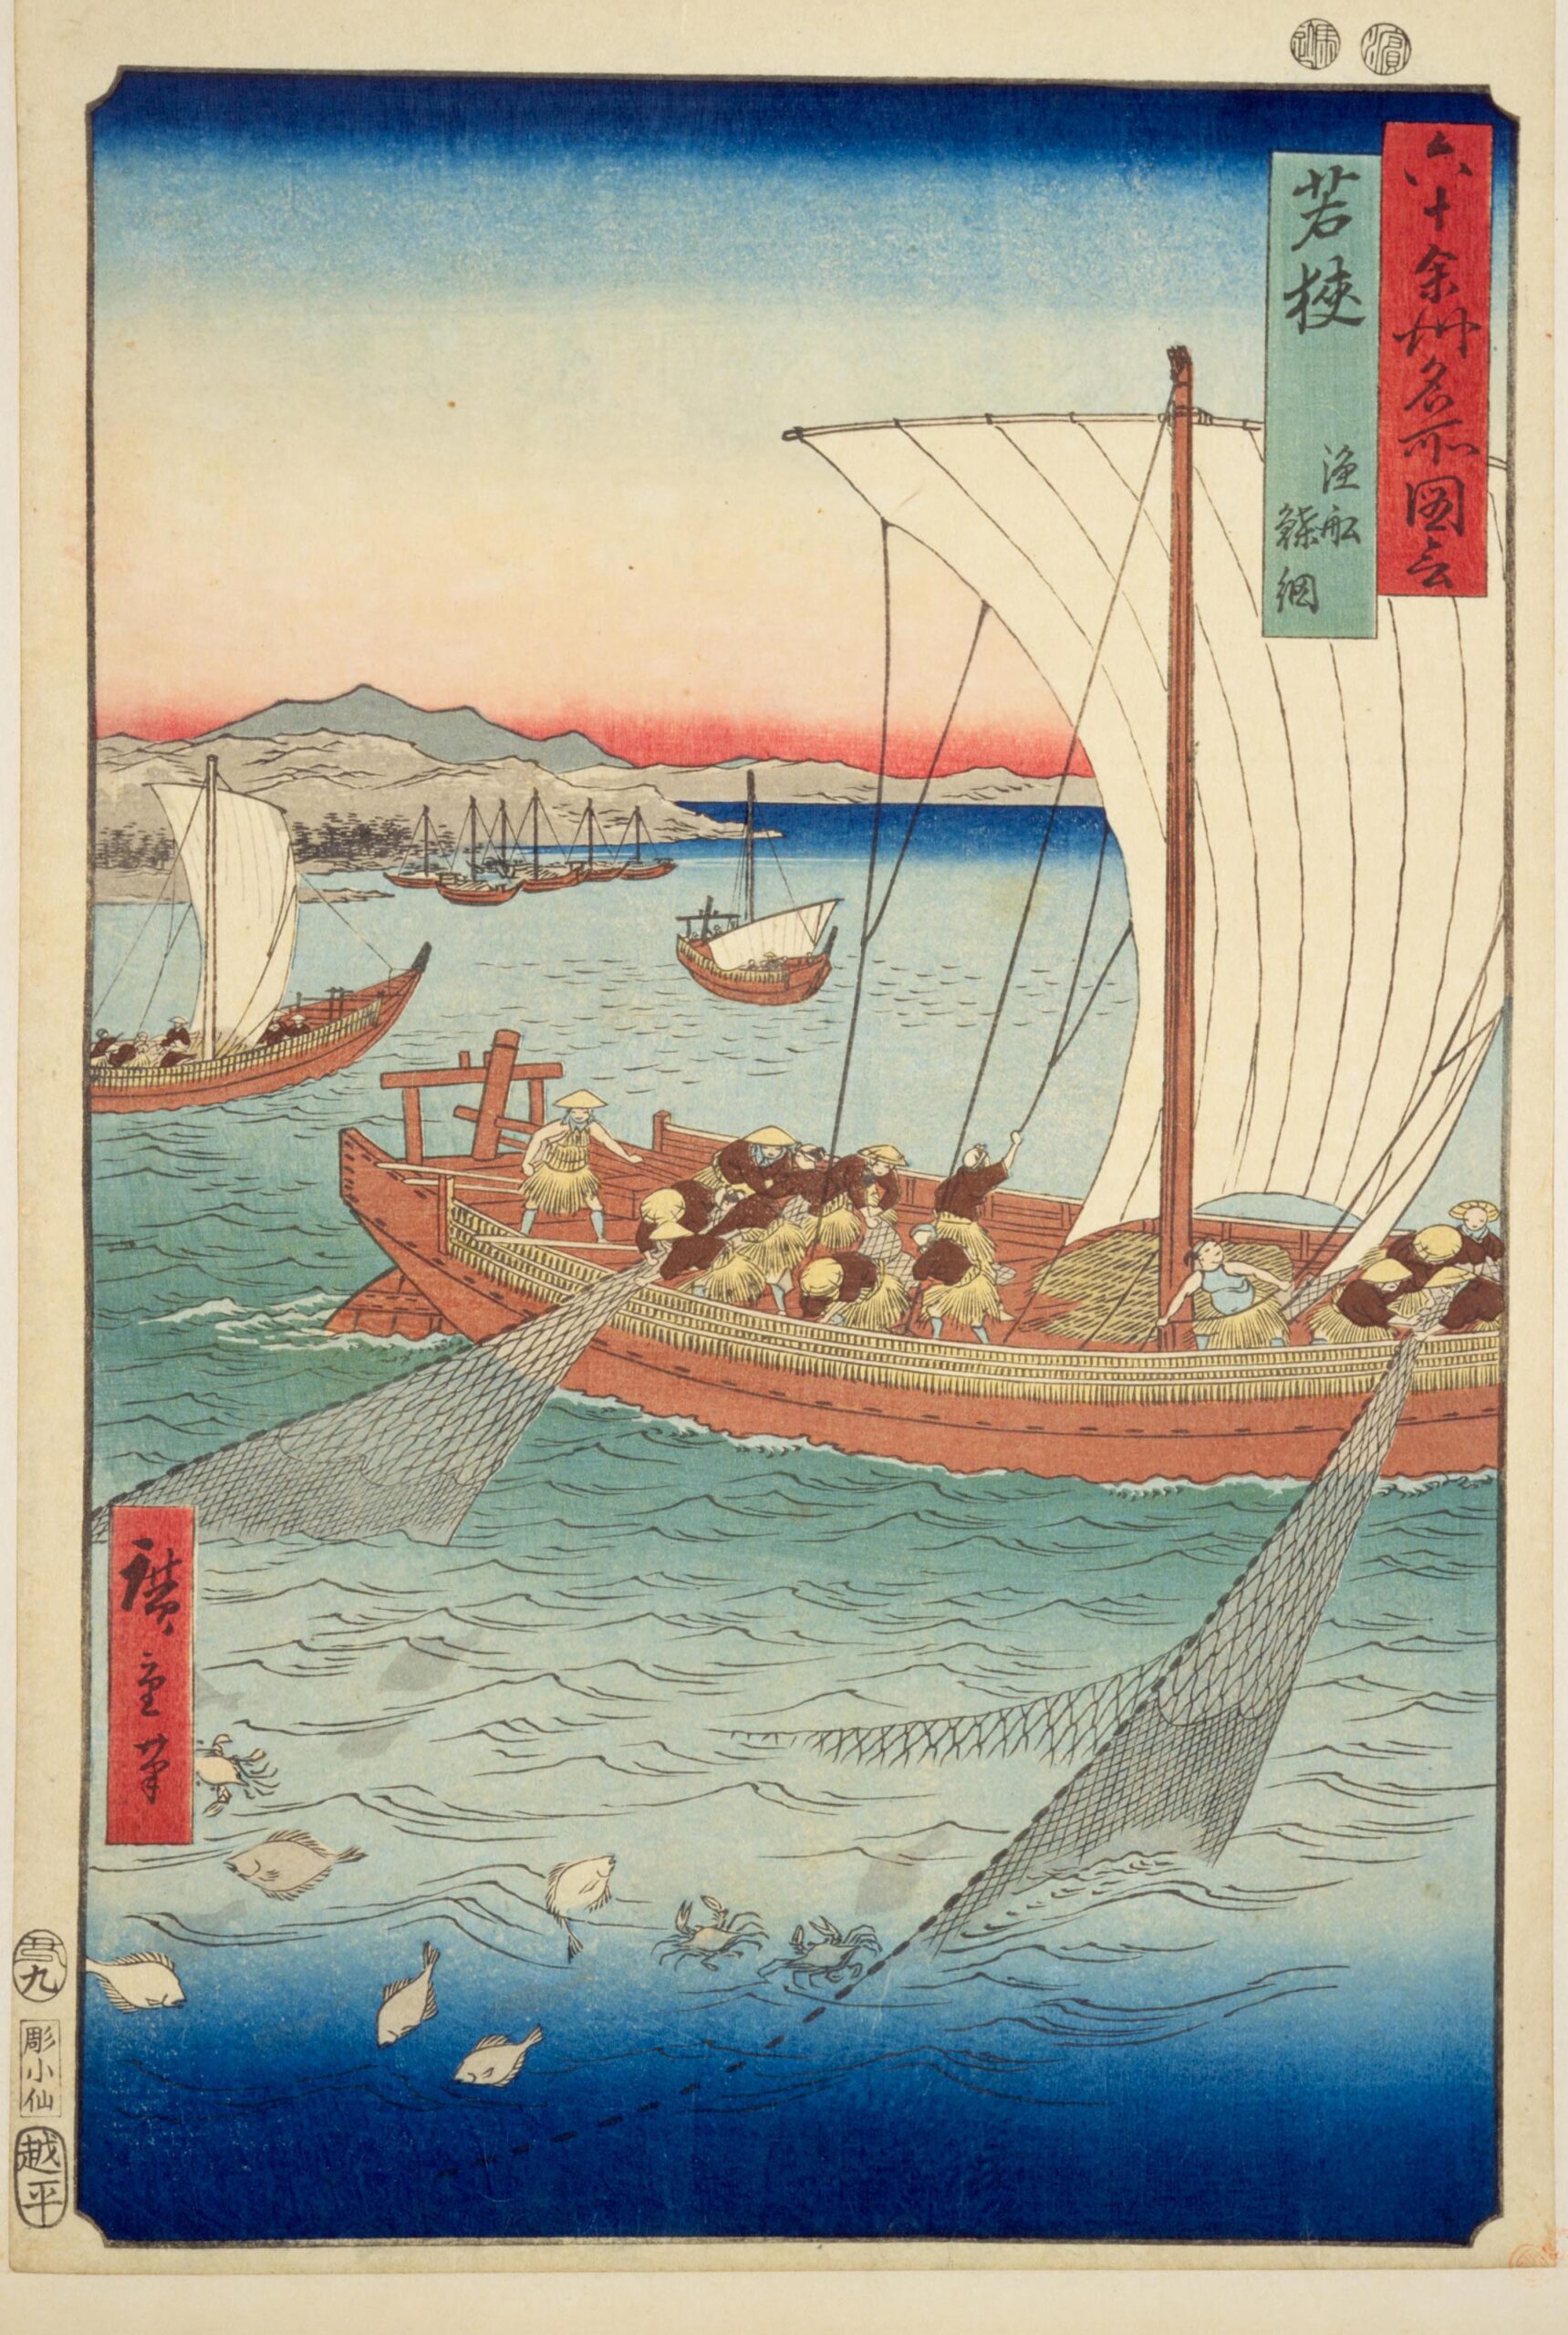 Hiroshiges - 30 Wakasa Province: A Fishing Boat Catching Flat-Fish in a Net (Wakasa, Gyosen karei ami) - Pictures of Famous Places in the Sixty-odd Provinces